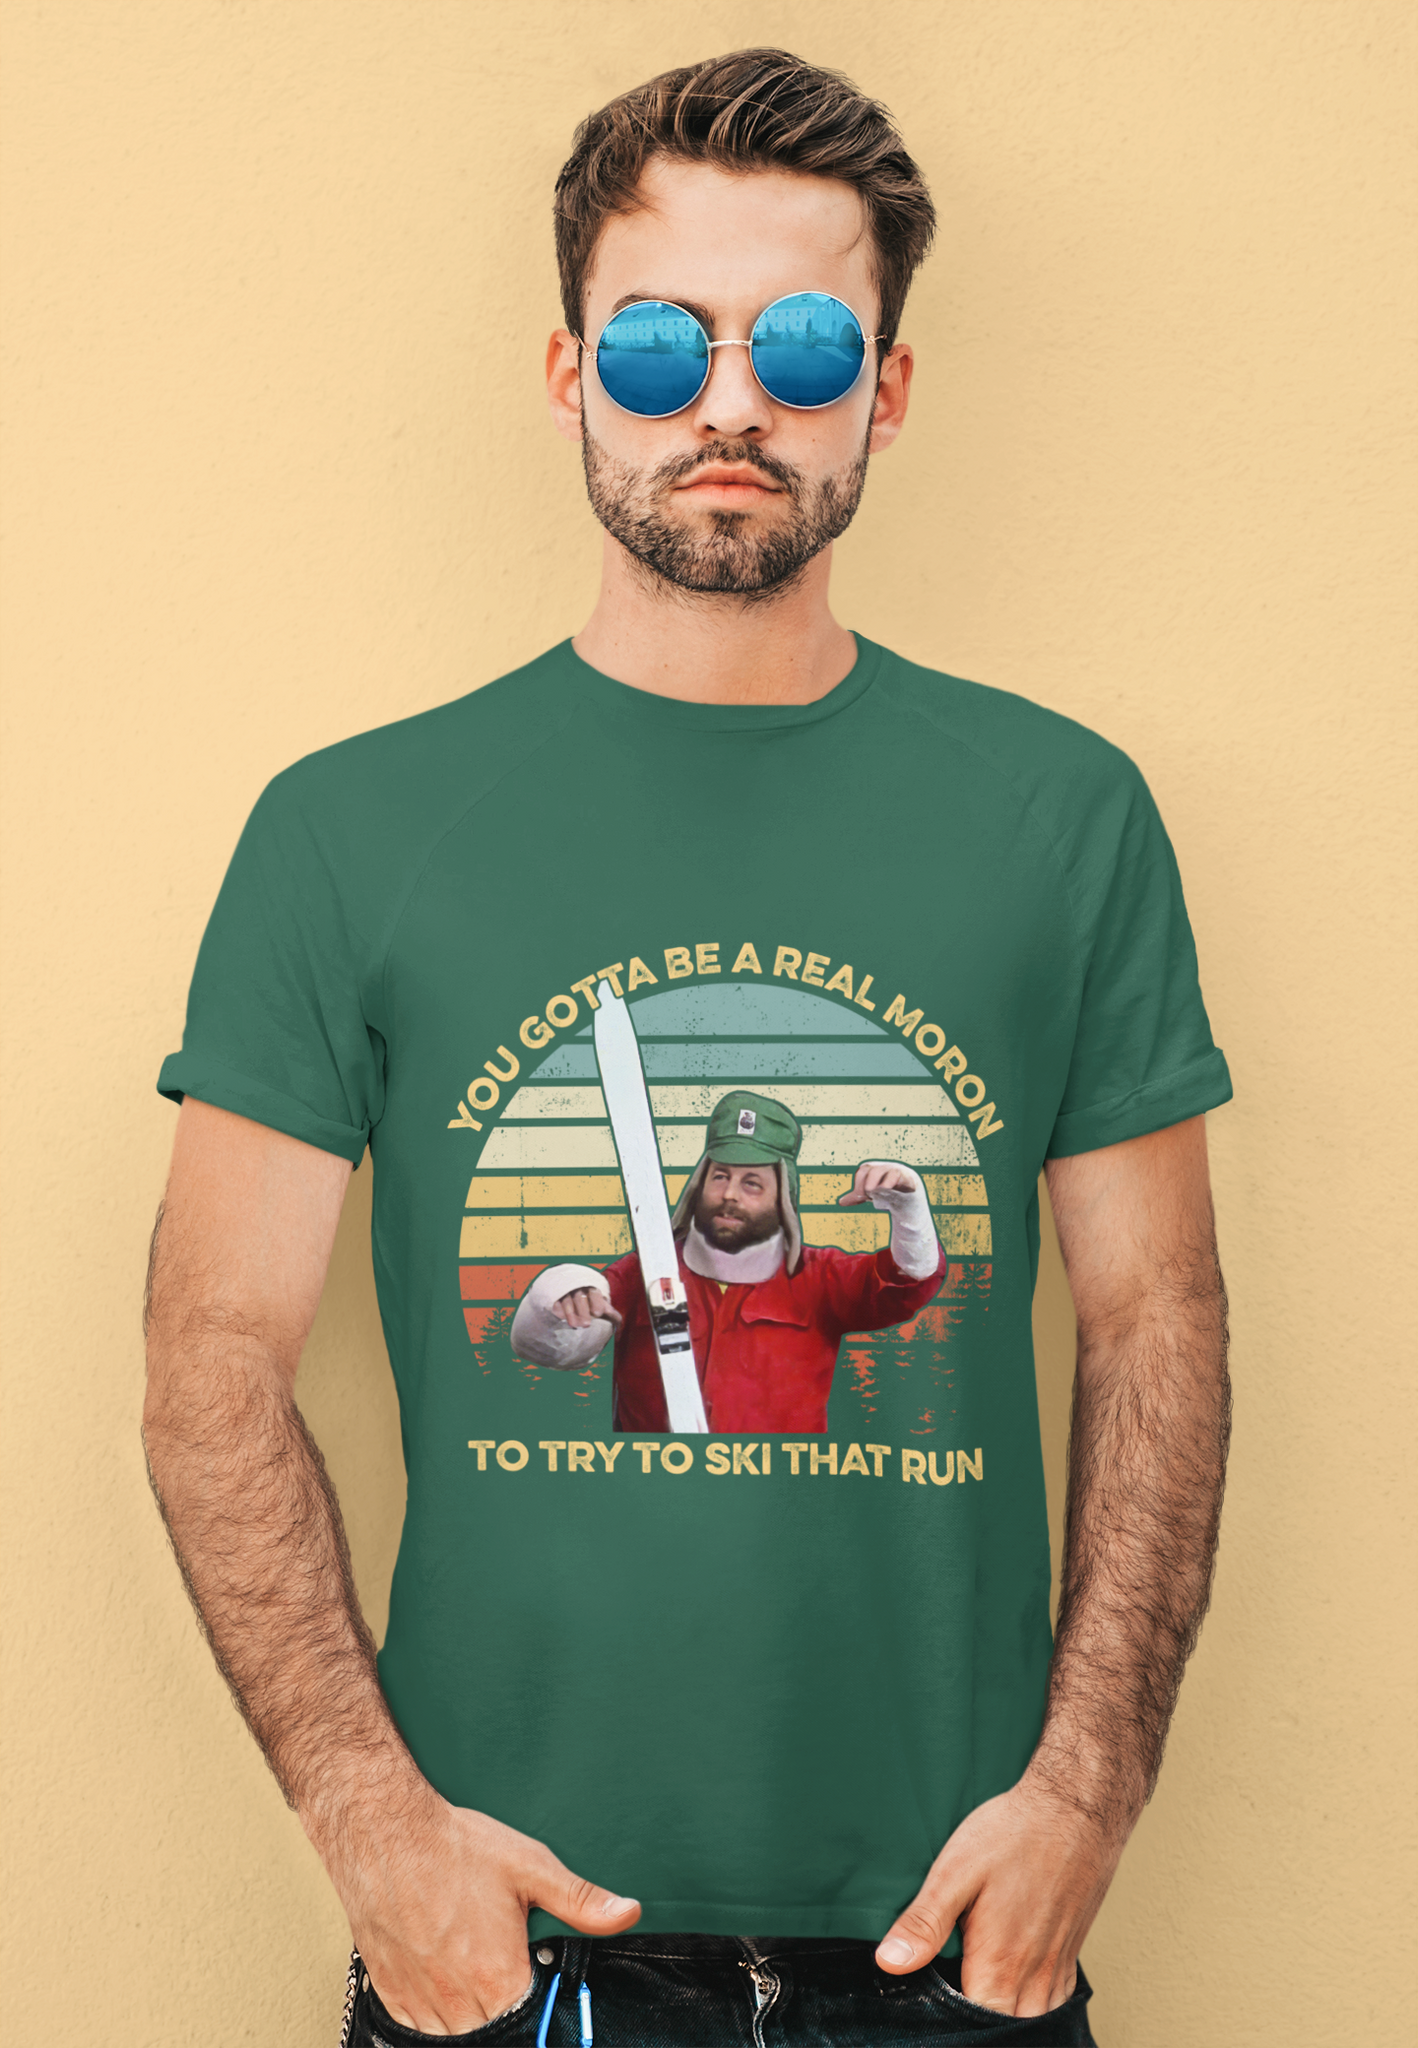 Better Off Dead Comedy Film T Shirt, You Gotta Be A Real Moron To Try To Ski That Run Tshirt